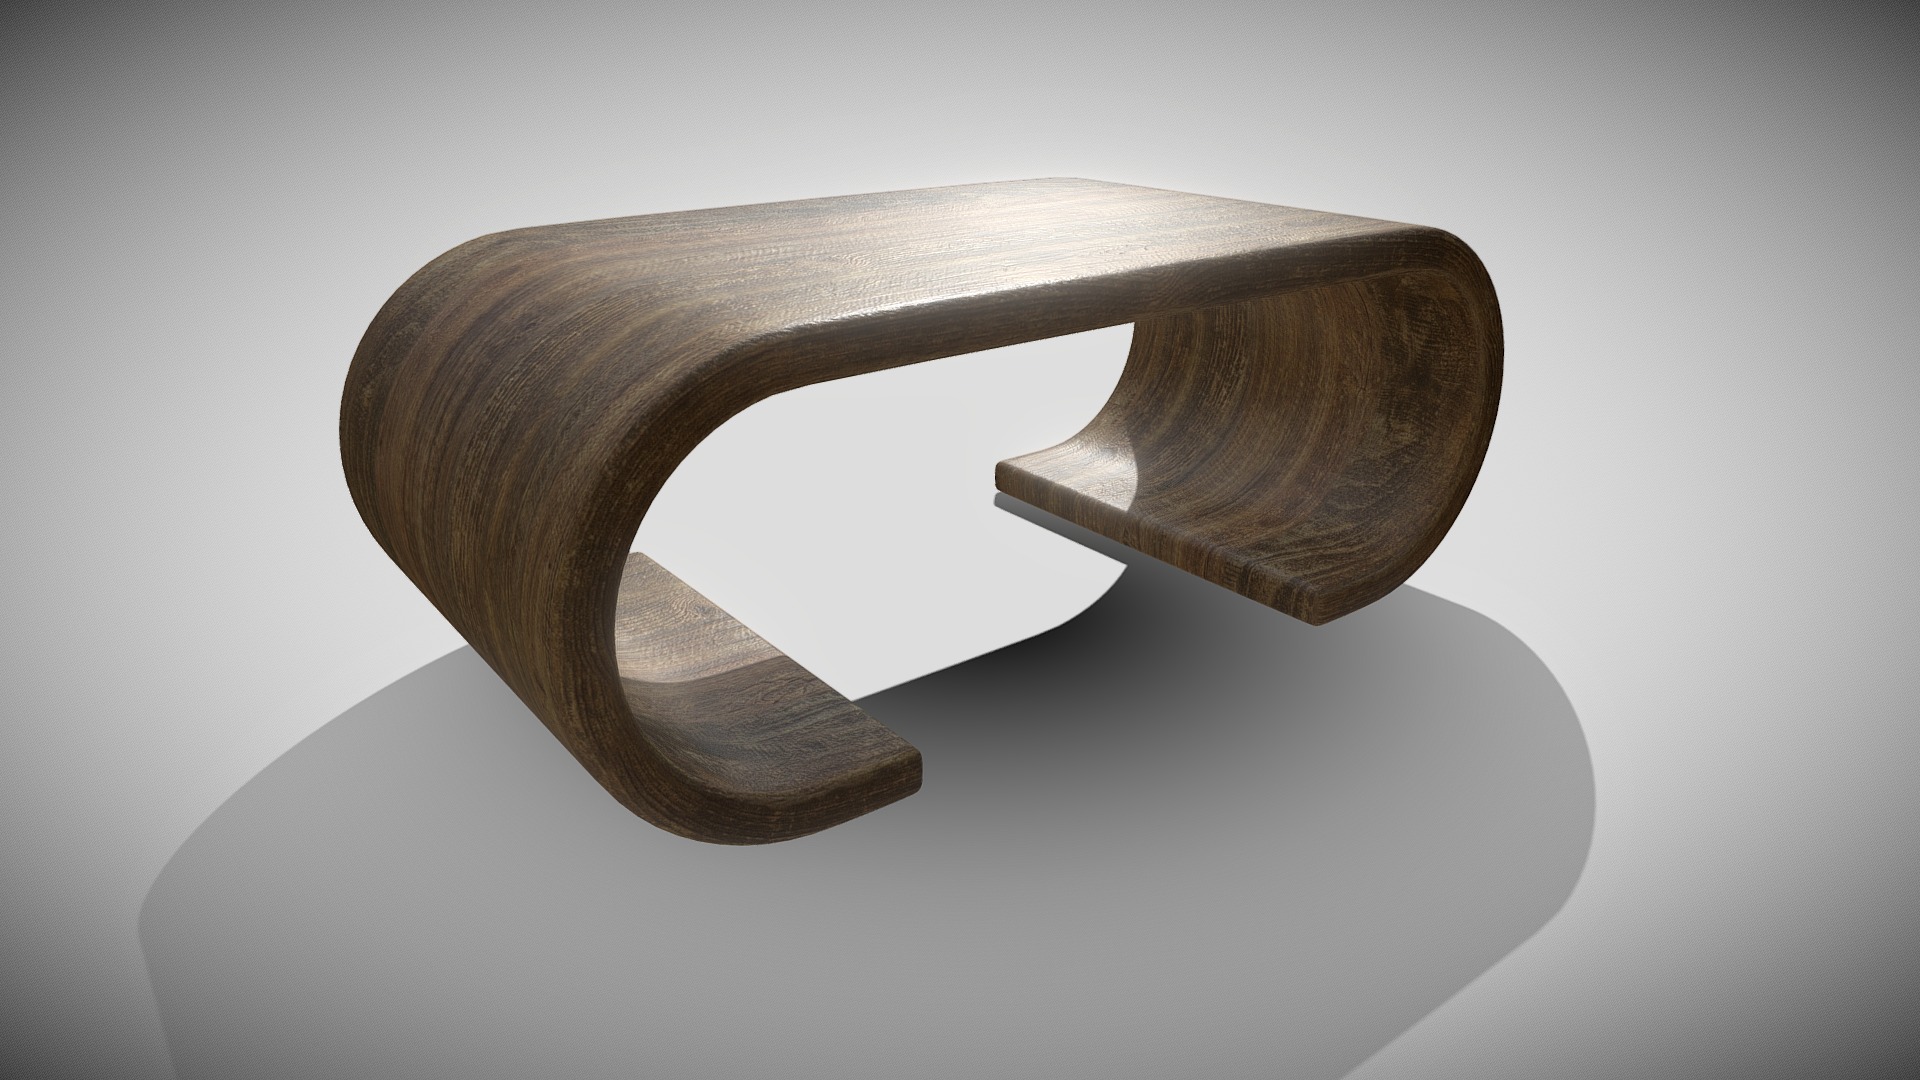 3D model Coffeetable (Blend File, OBJ, DAE) - This is a 3D model of the Coffeetable (Blend File, OBJ, DAE). The 3D model is about a wooden sculpture of a hammer.